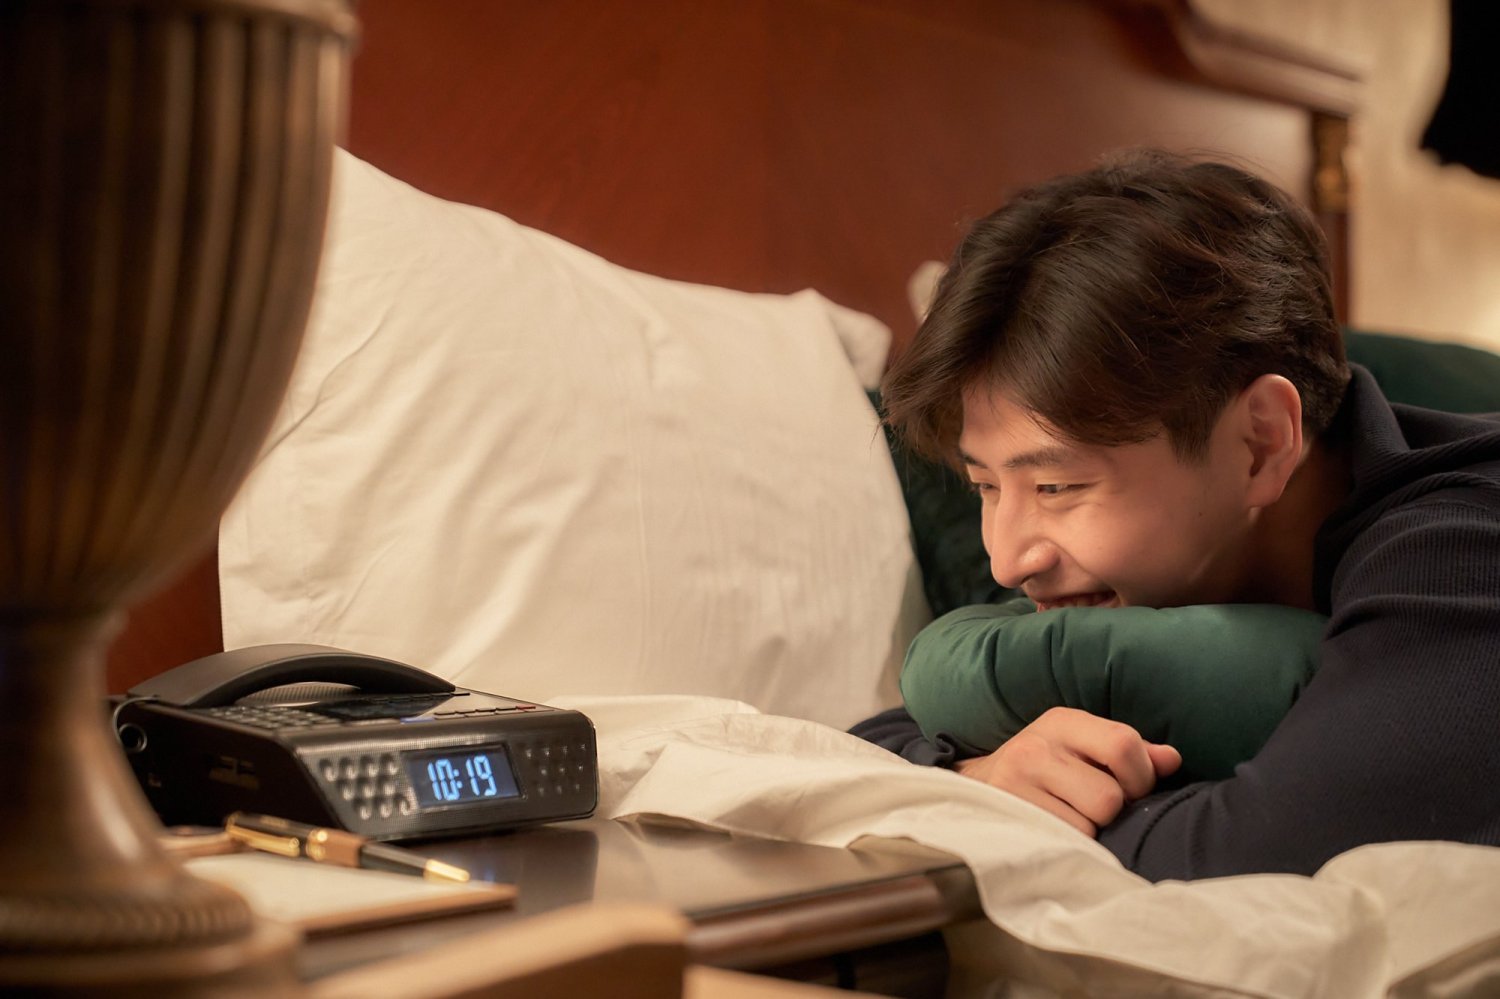 [Photos] New Stills Added for the Upcoming Korean Movie 'A Year-End